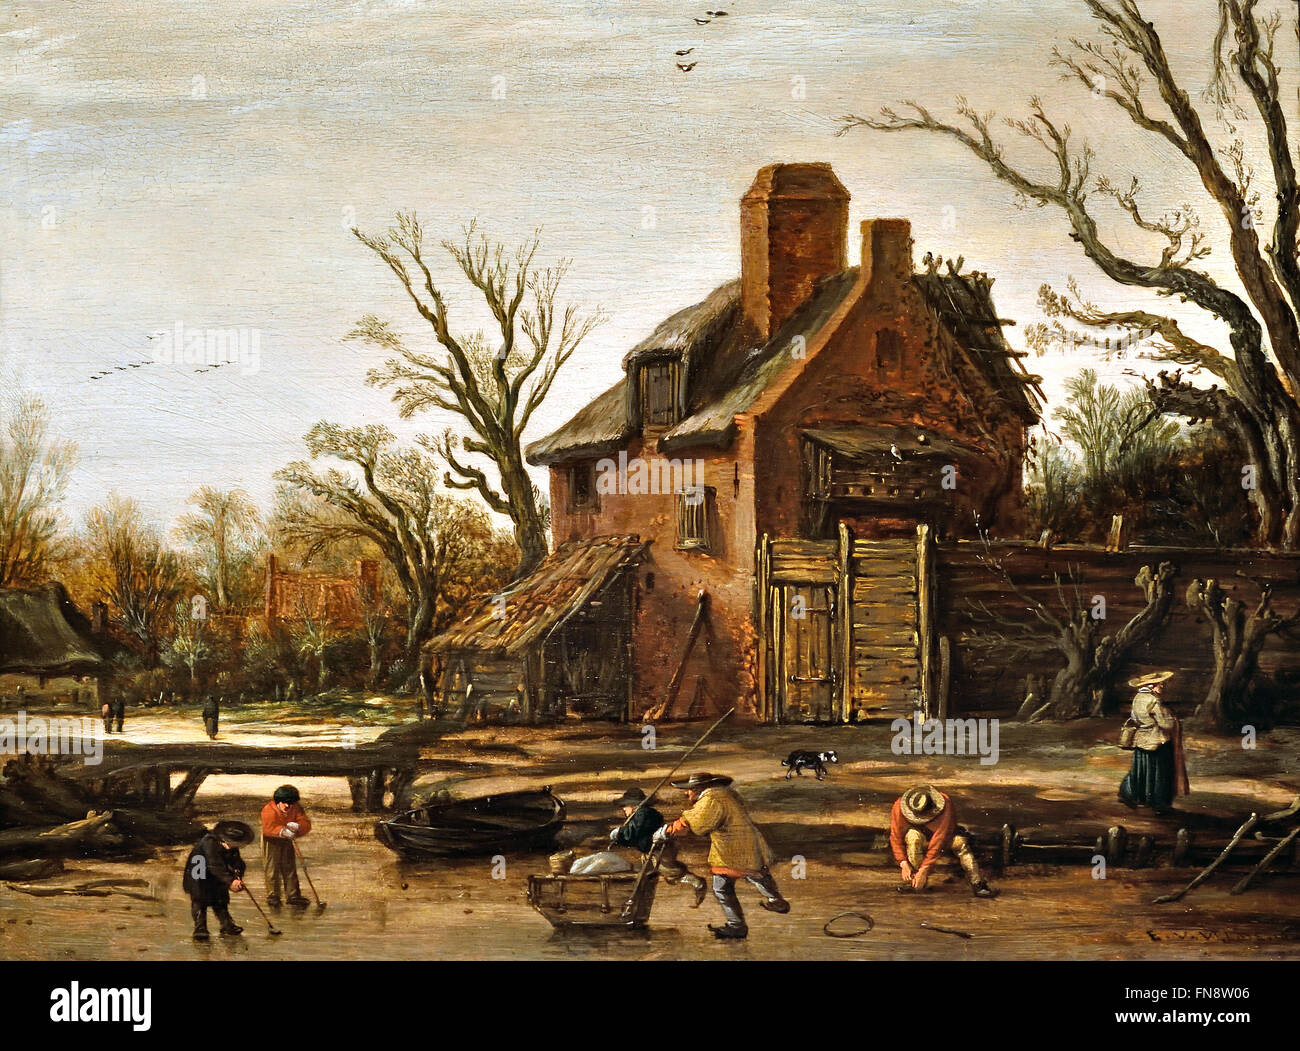 Esaias van de Velde, Winter Landscape with Farmhouse, 1624 Dutch Netherlands  One man is tying on his skates and another is pushing along a sledge, while two boys are playing ‘kolf’ – a game similar to today’s ice hockey ) Stock Photo